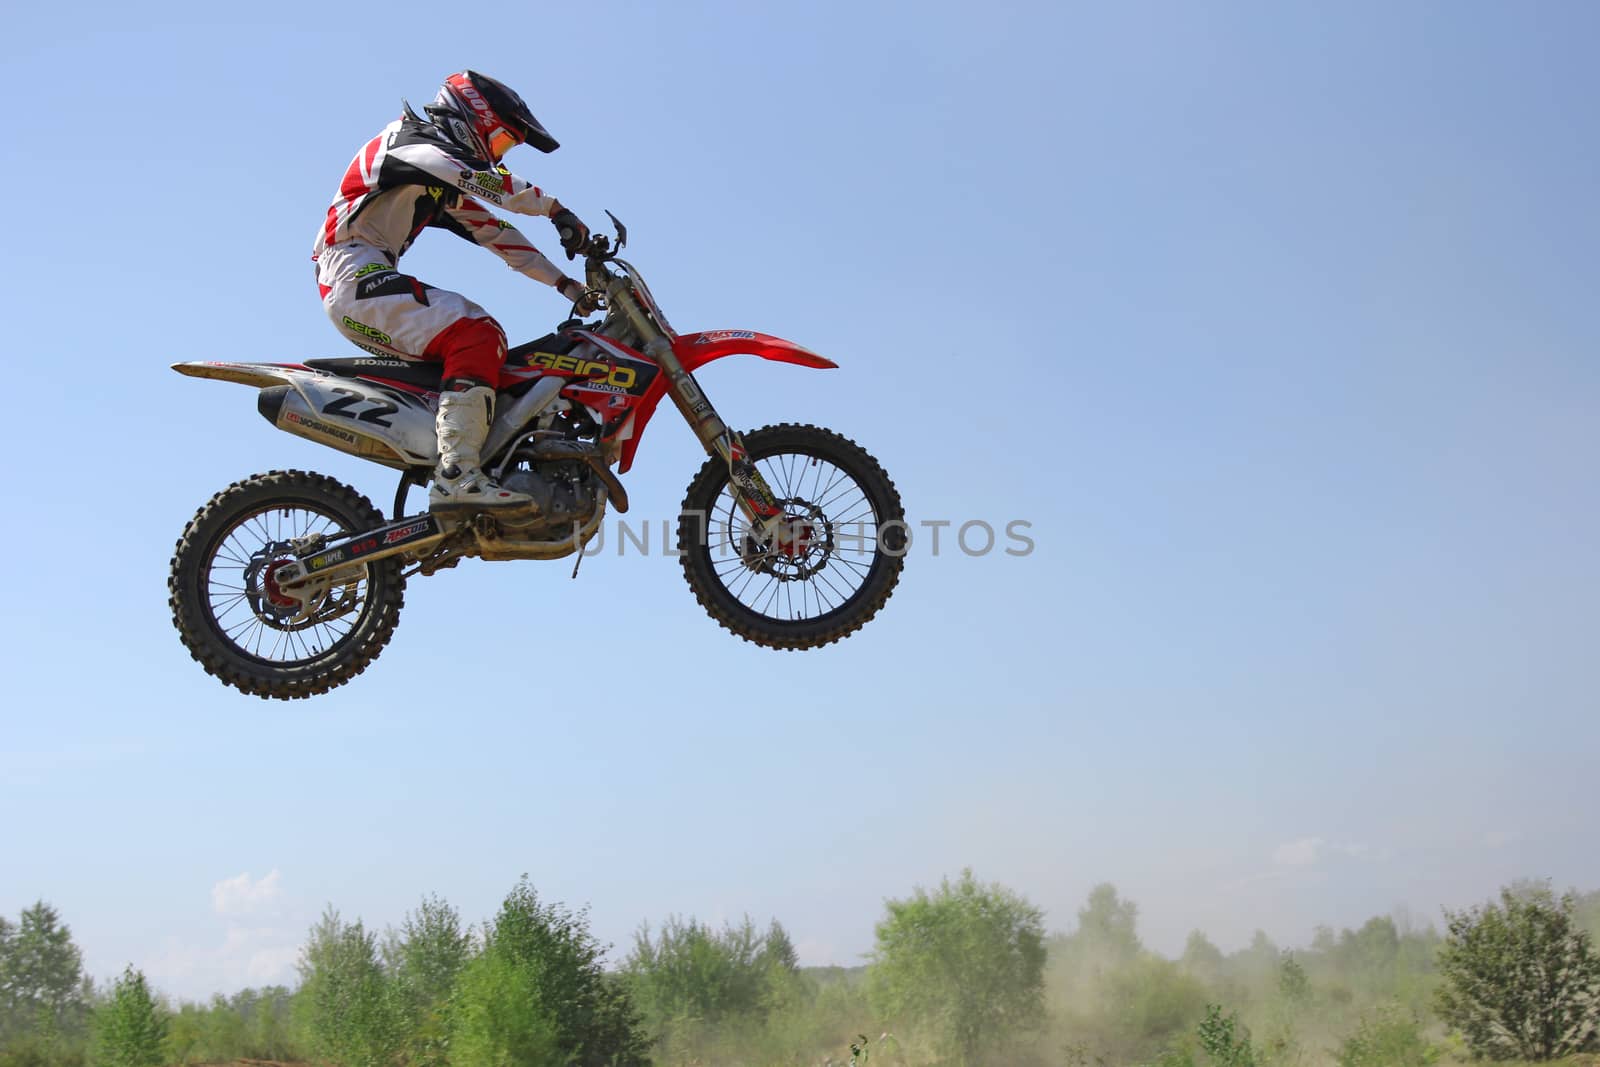 ARSENYEV, RUSSIA - AUG 30: Rider participates in the round of the 2014 Russia motocross championship on August 30, 2014 in Arsenyev, Russia.